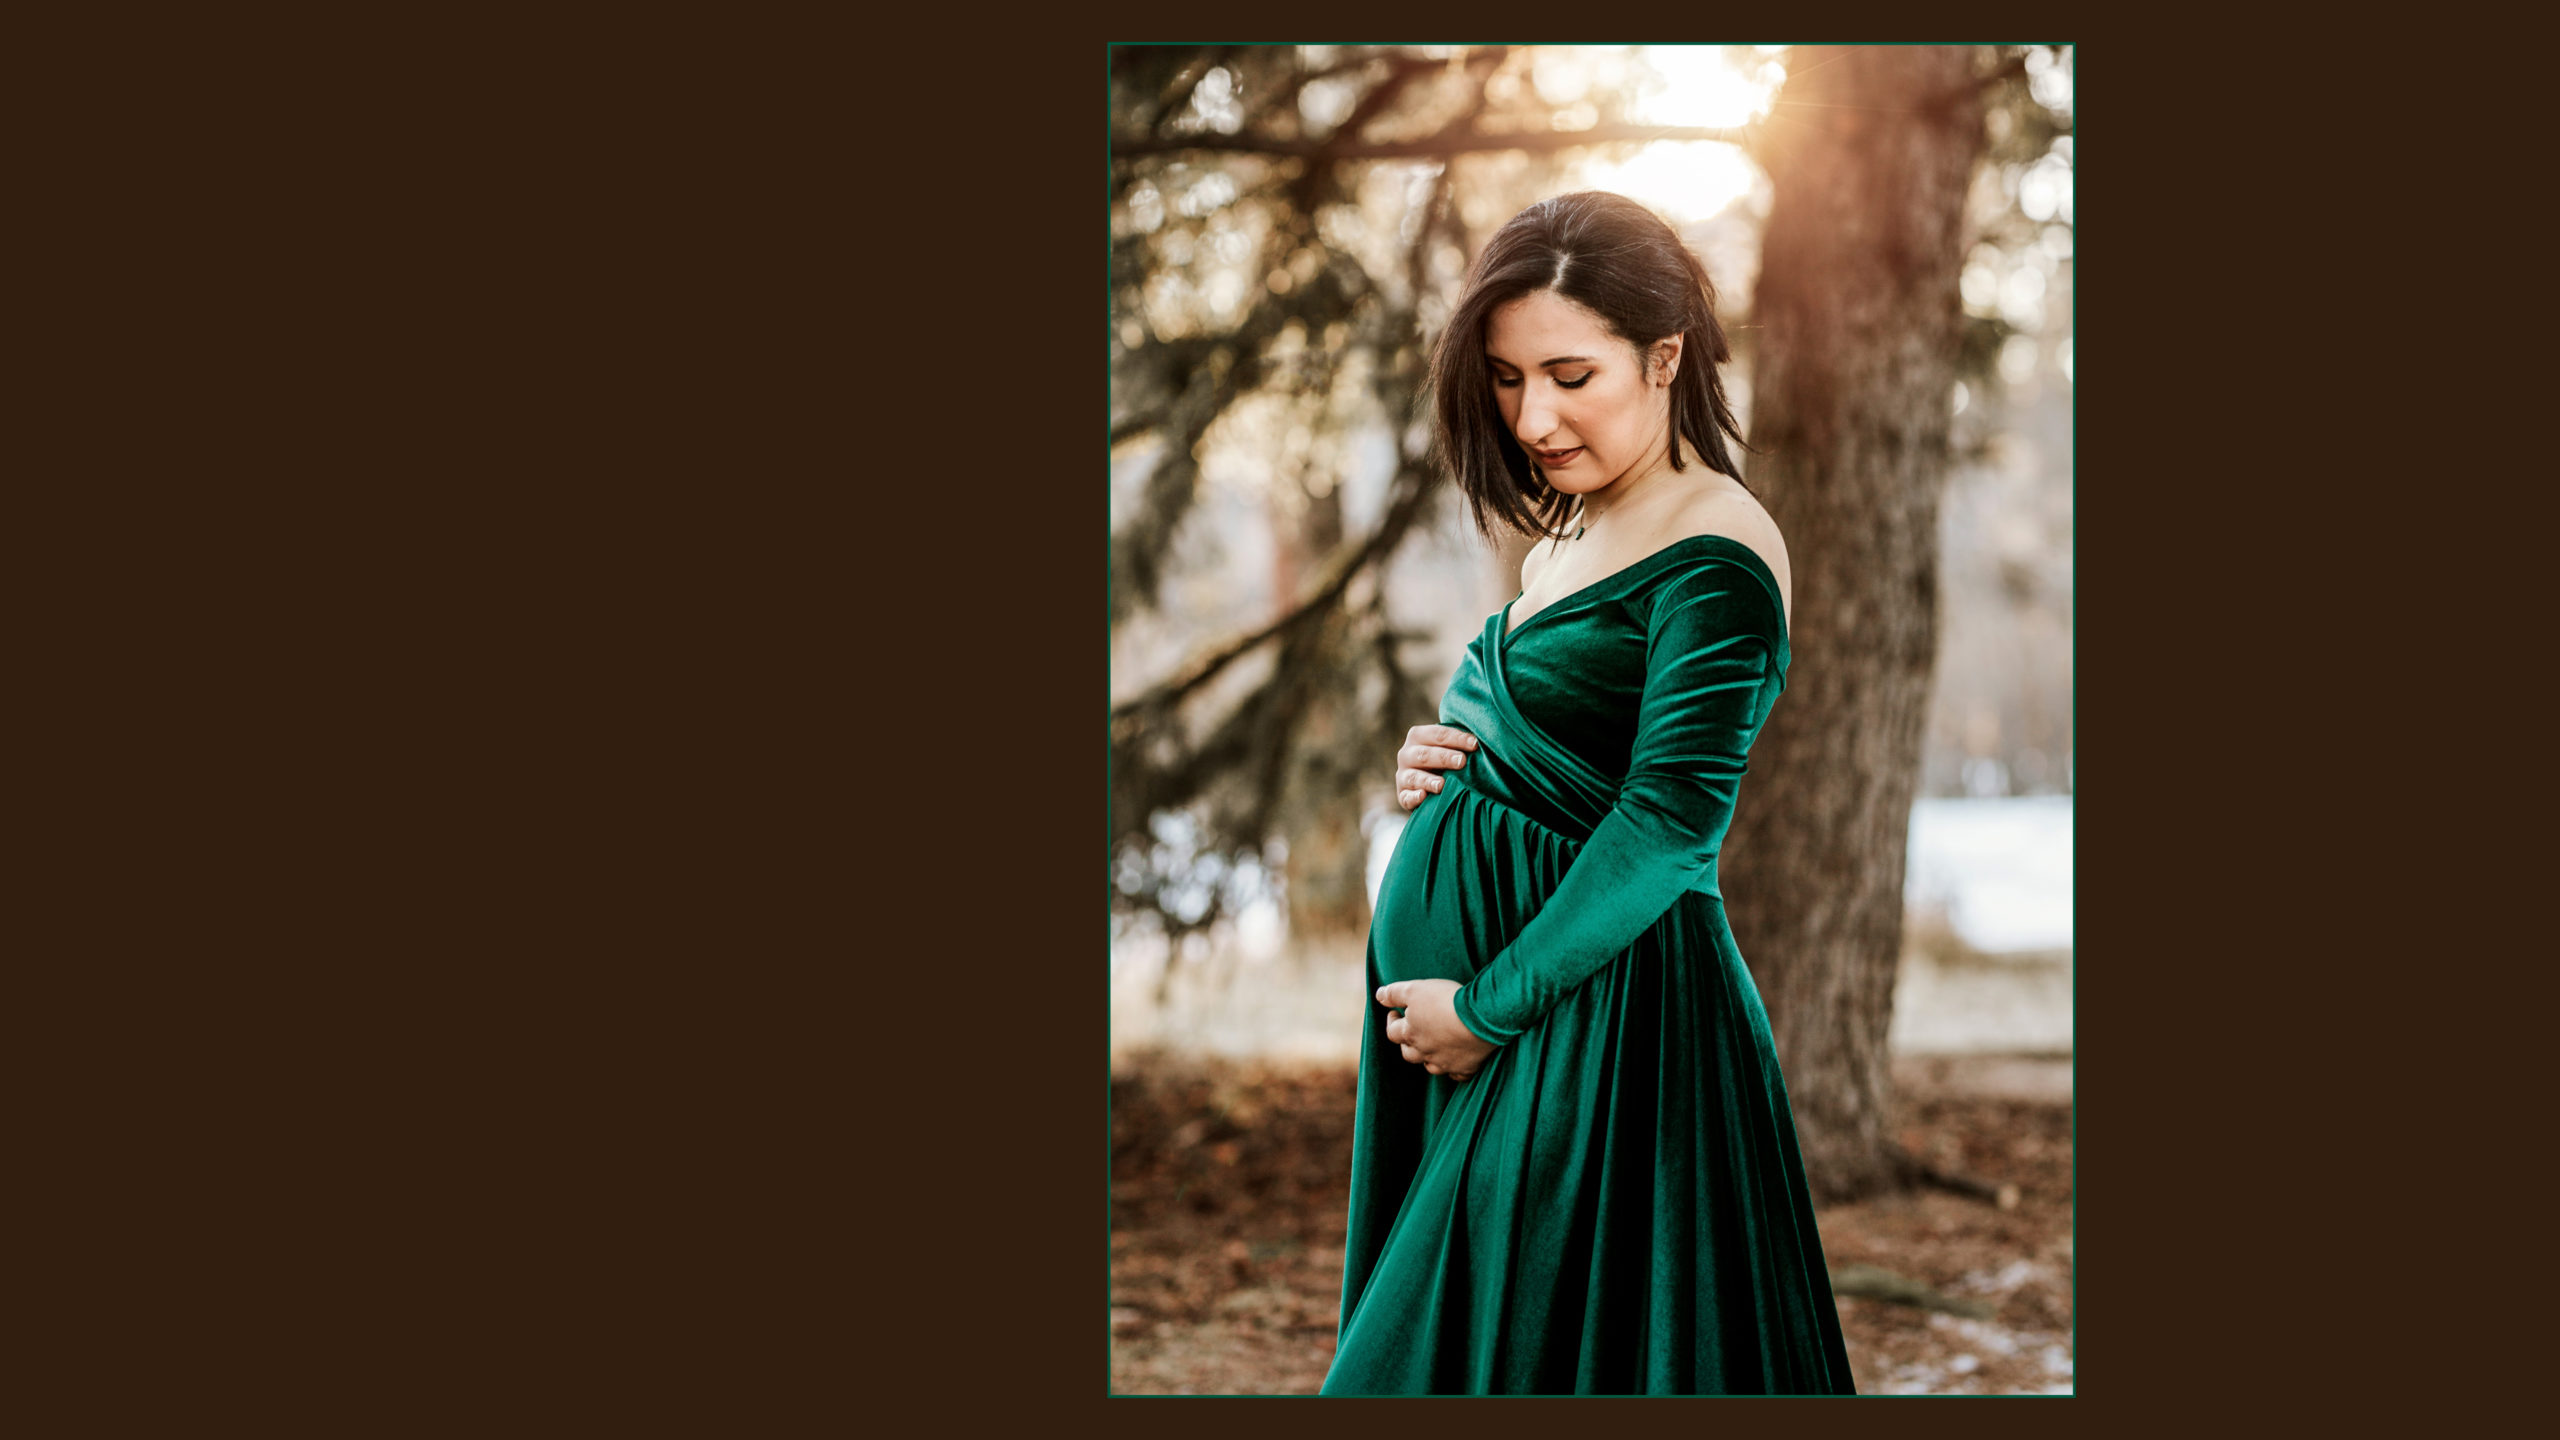 Pregnant lady in a green velvet gown at sunset